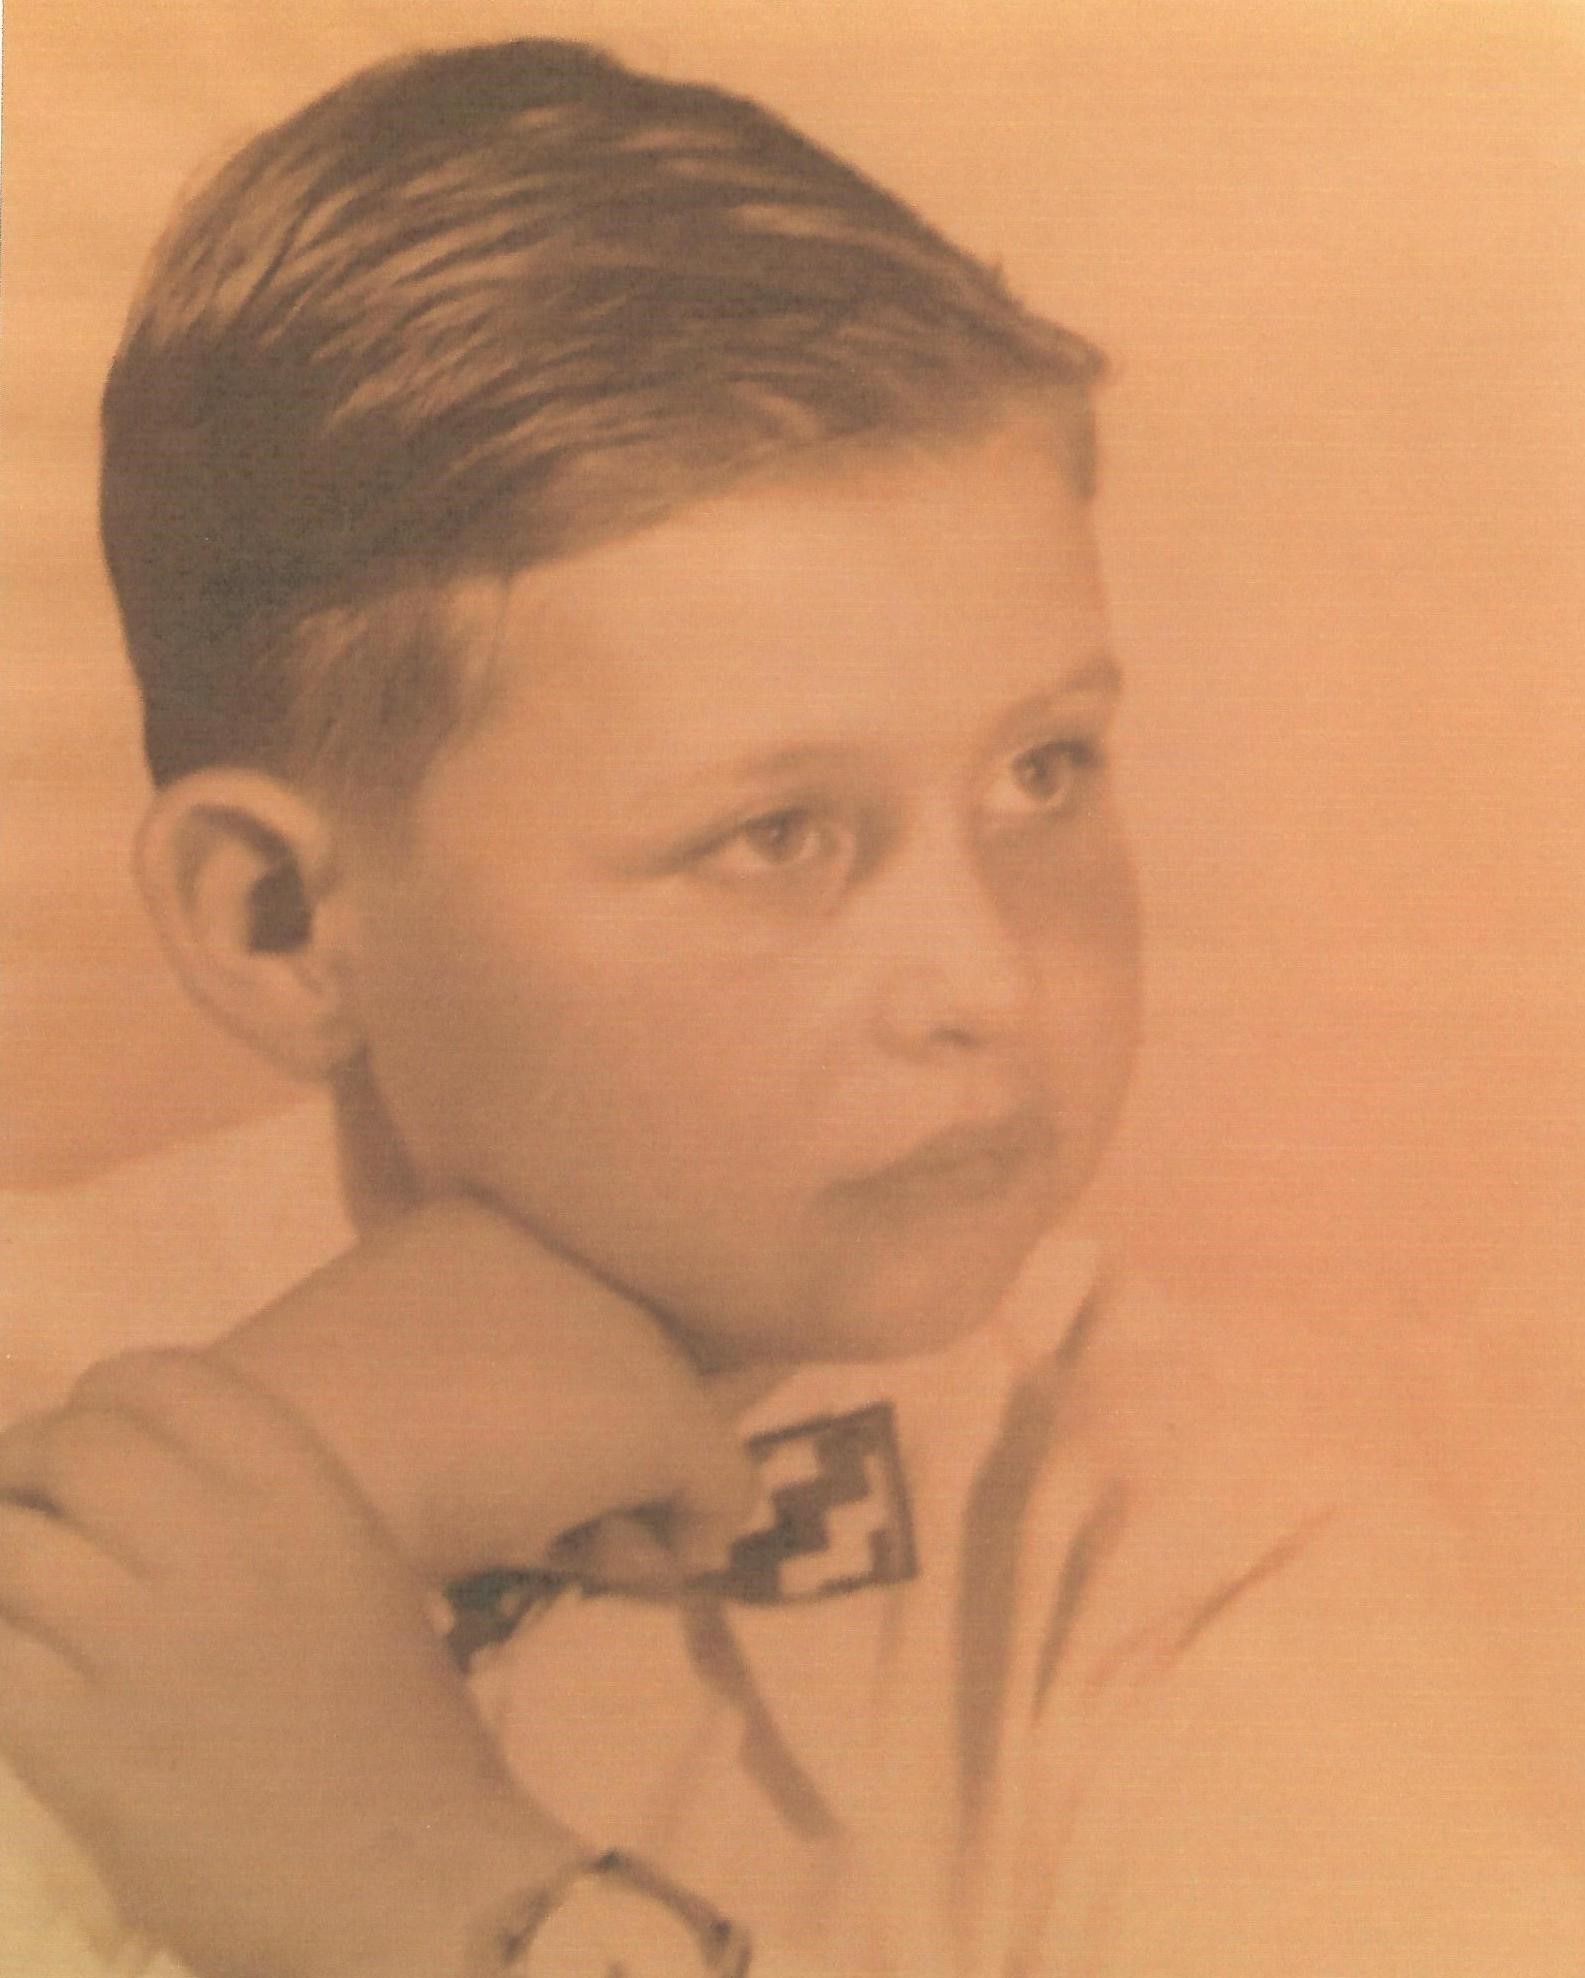 Victor at age 6